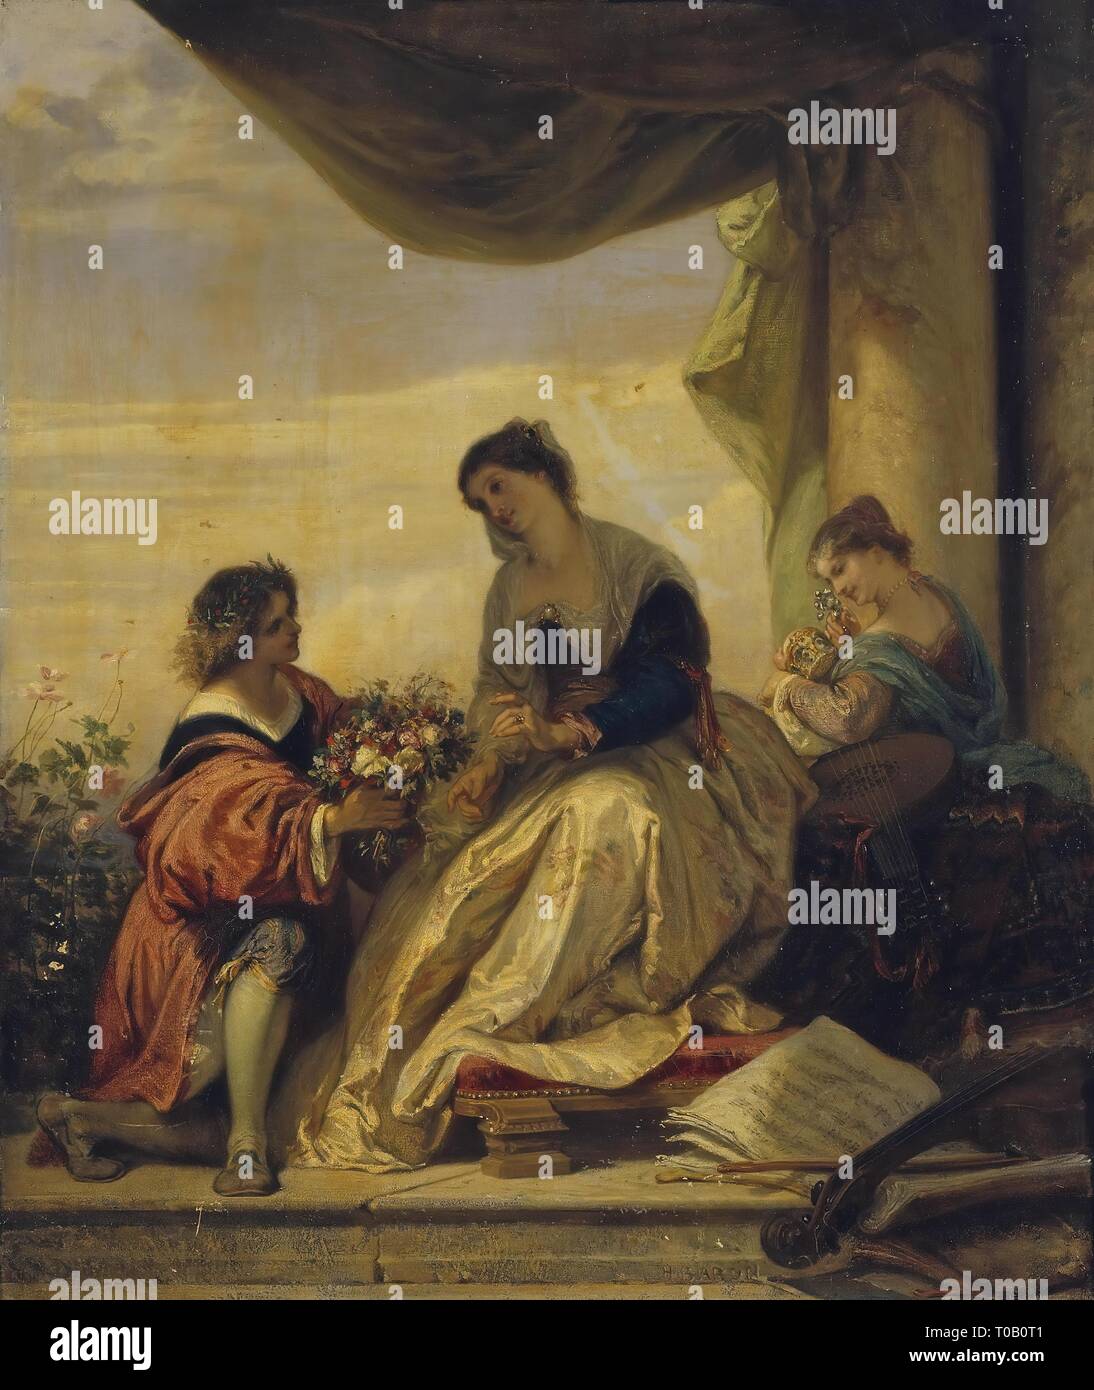 'Gallant Scene (Presentation of a Bouquet)'. France, 1850s. Dimensions: 65x56 cm. Museum: State Hermitage, St. Petersburg. Author: Henri Charles Antoine Baron. Stock Photo